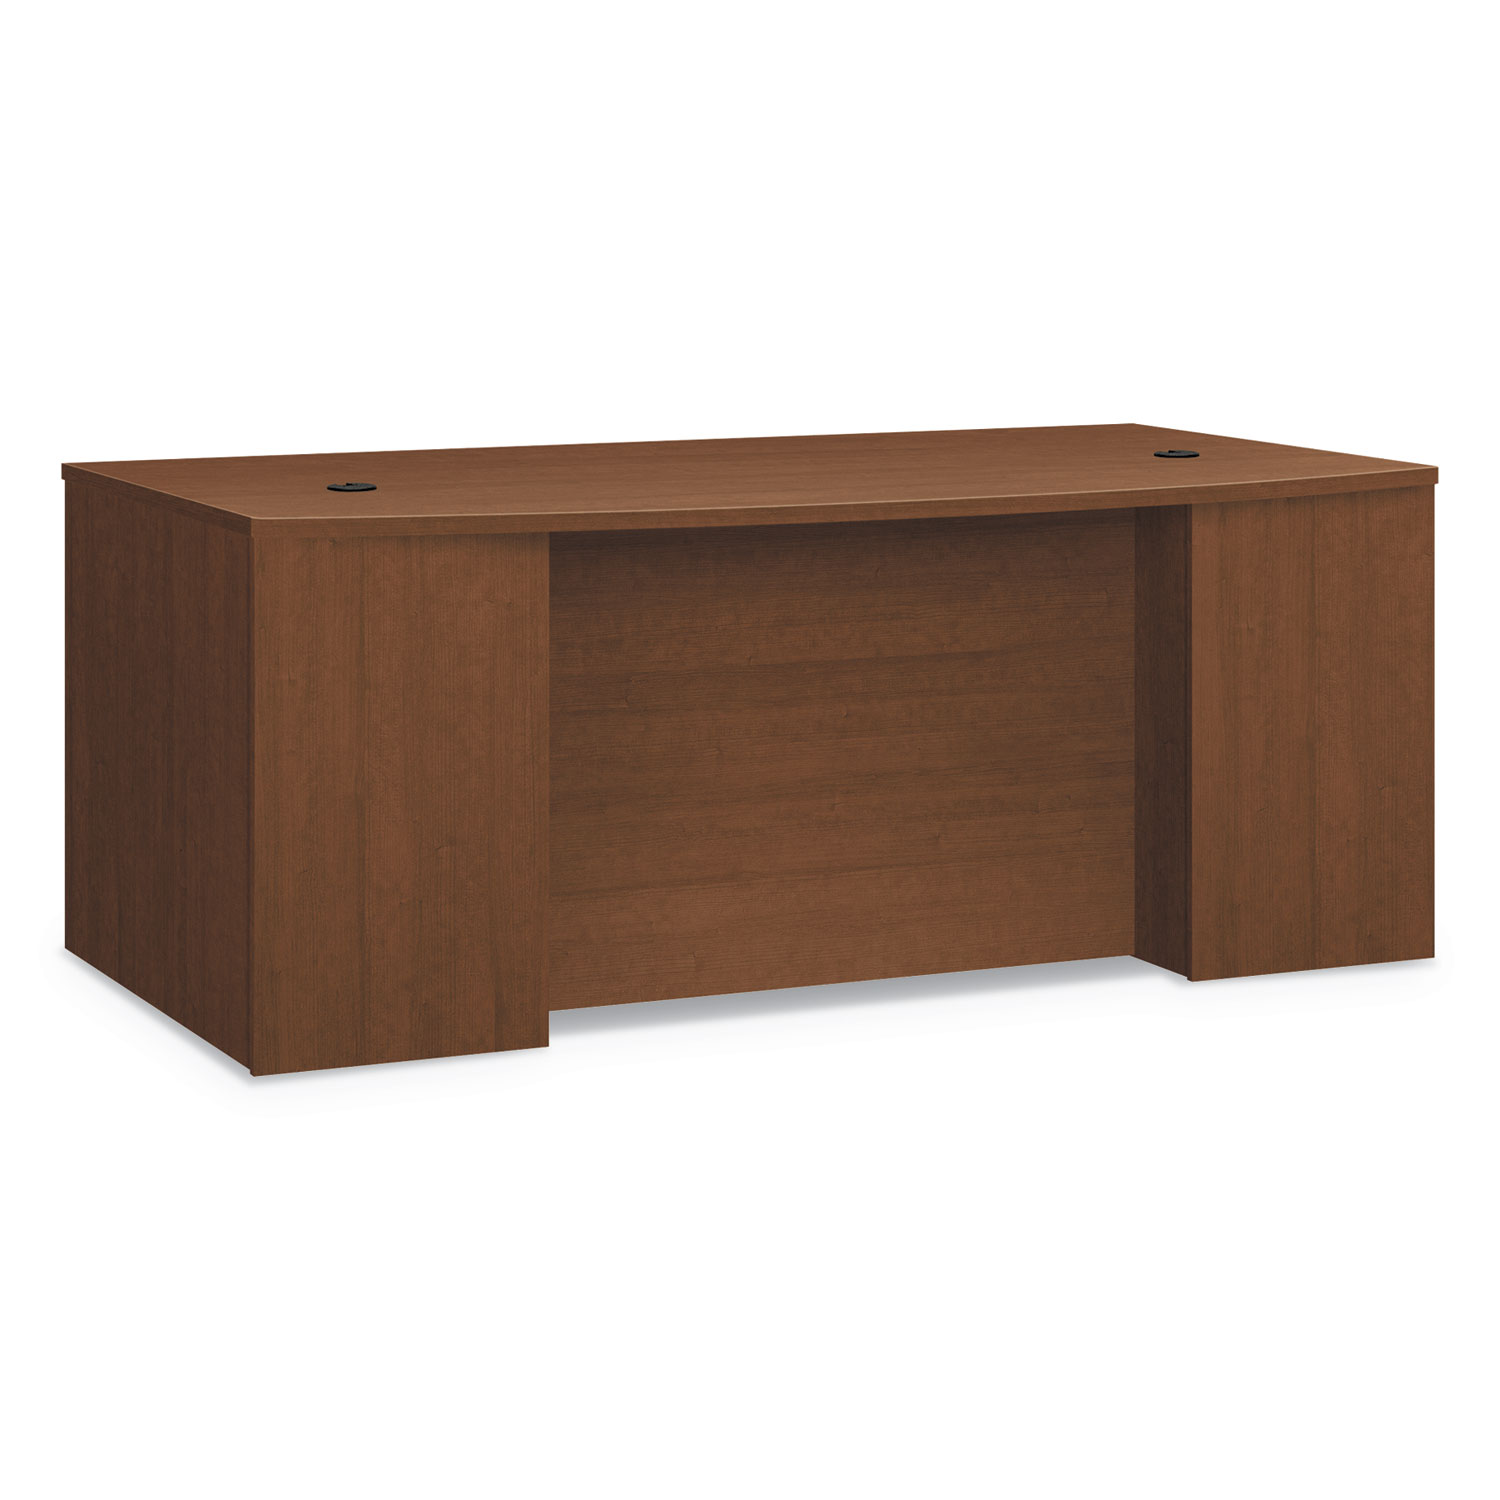 Foundation Breakfront Desk Shell Bow Front, 72w x 42d, Shaker Cherry